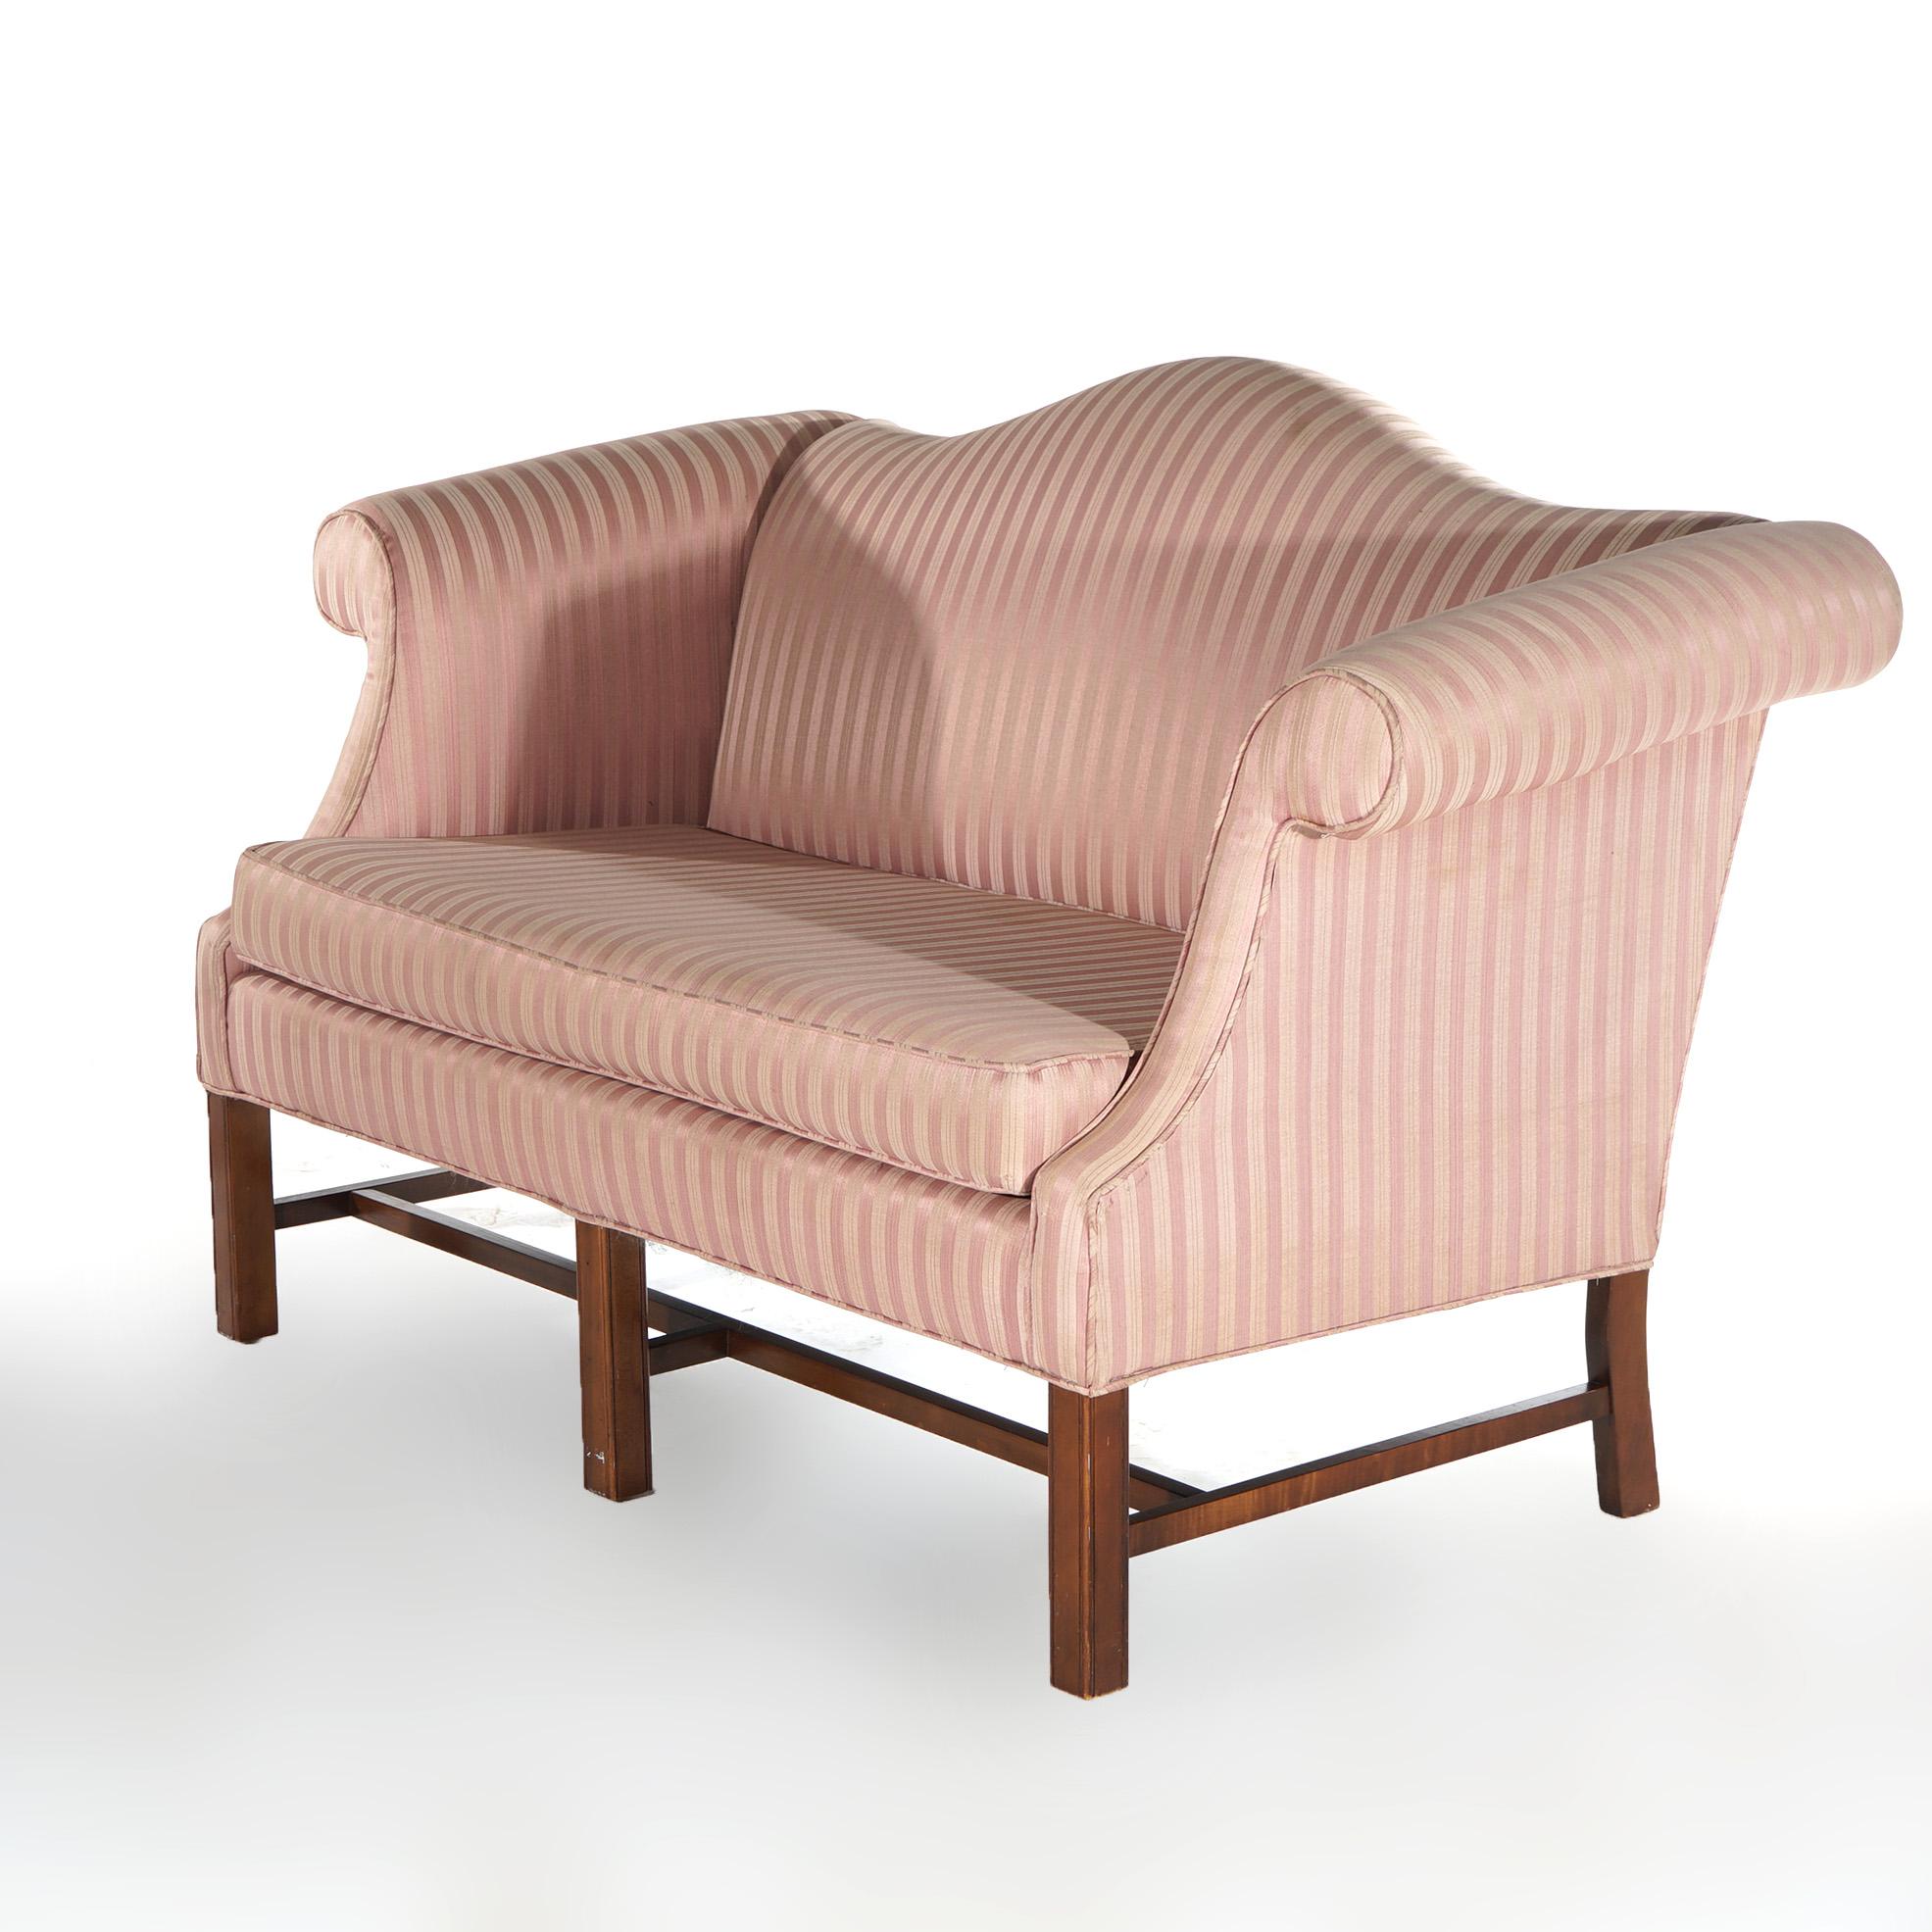 An antique English Georgian style settee offers upholstered camelback form with scroll arms and raised on straight legs, c1930

Measures - 36